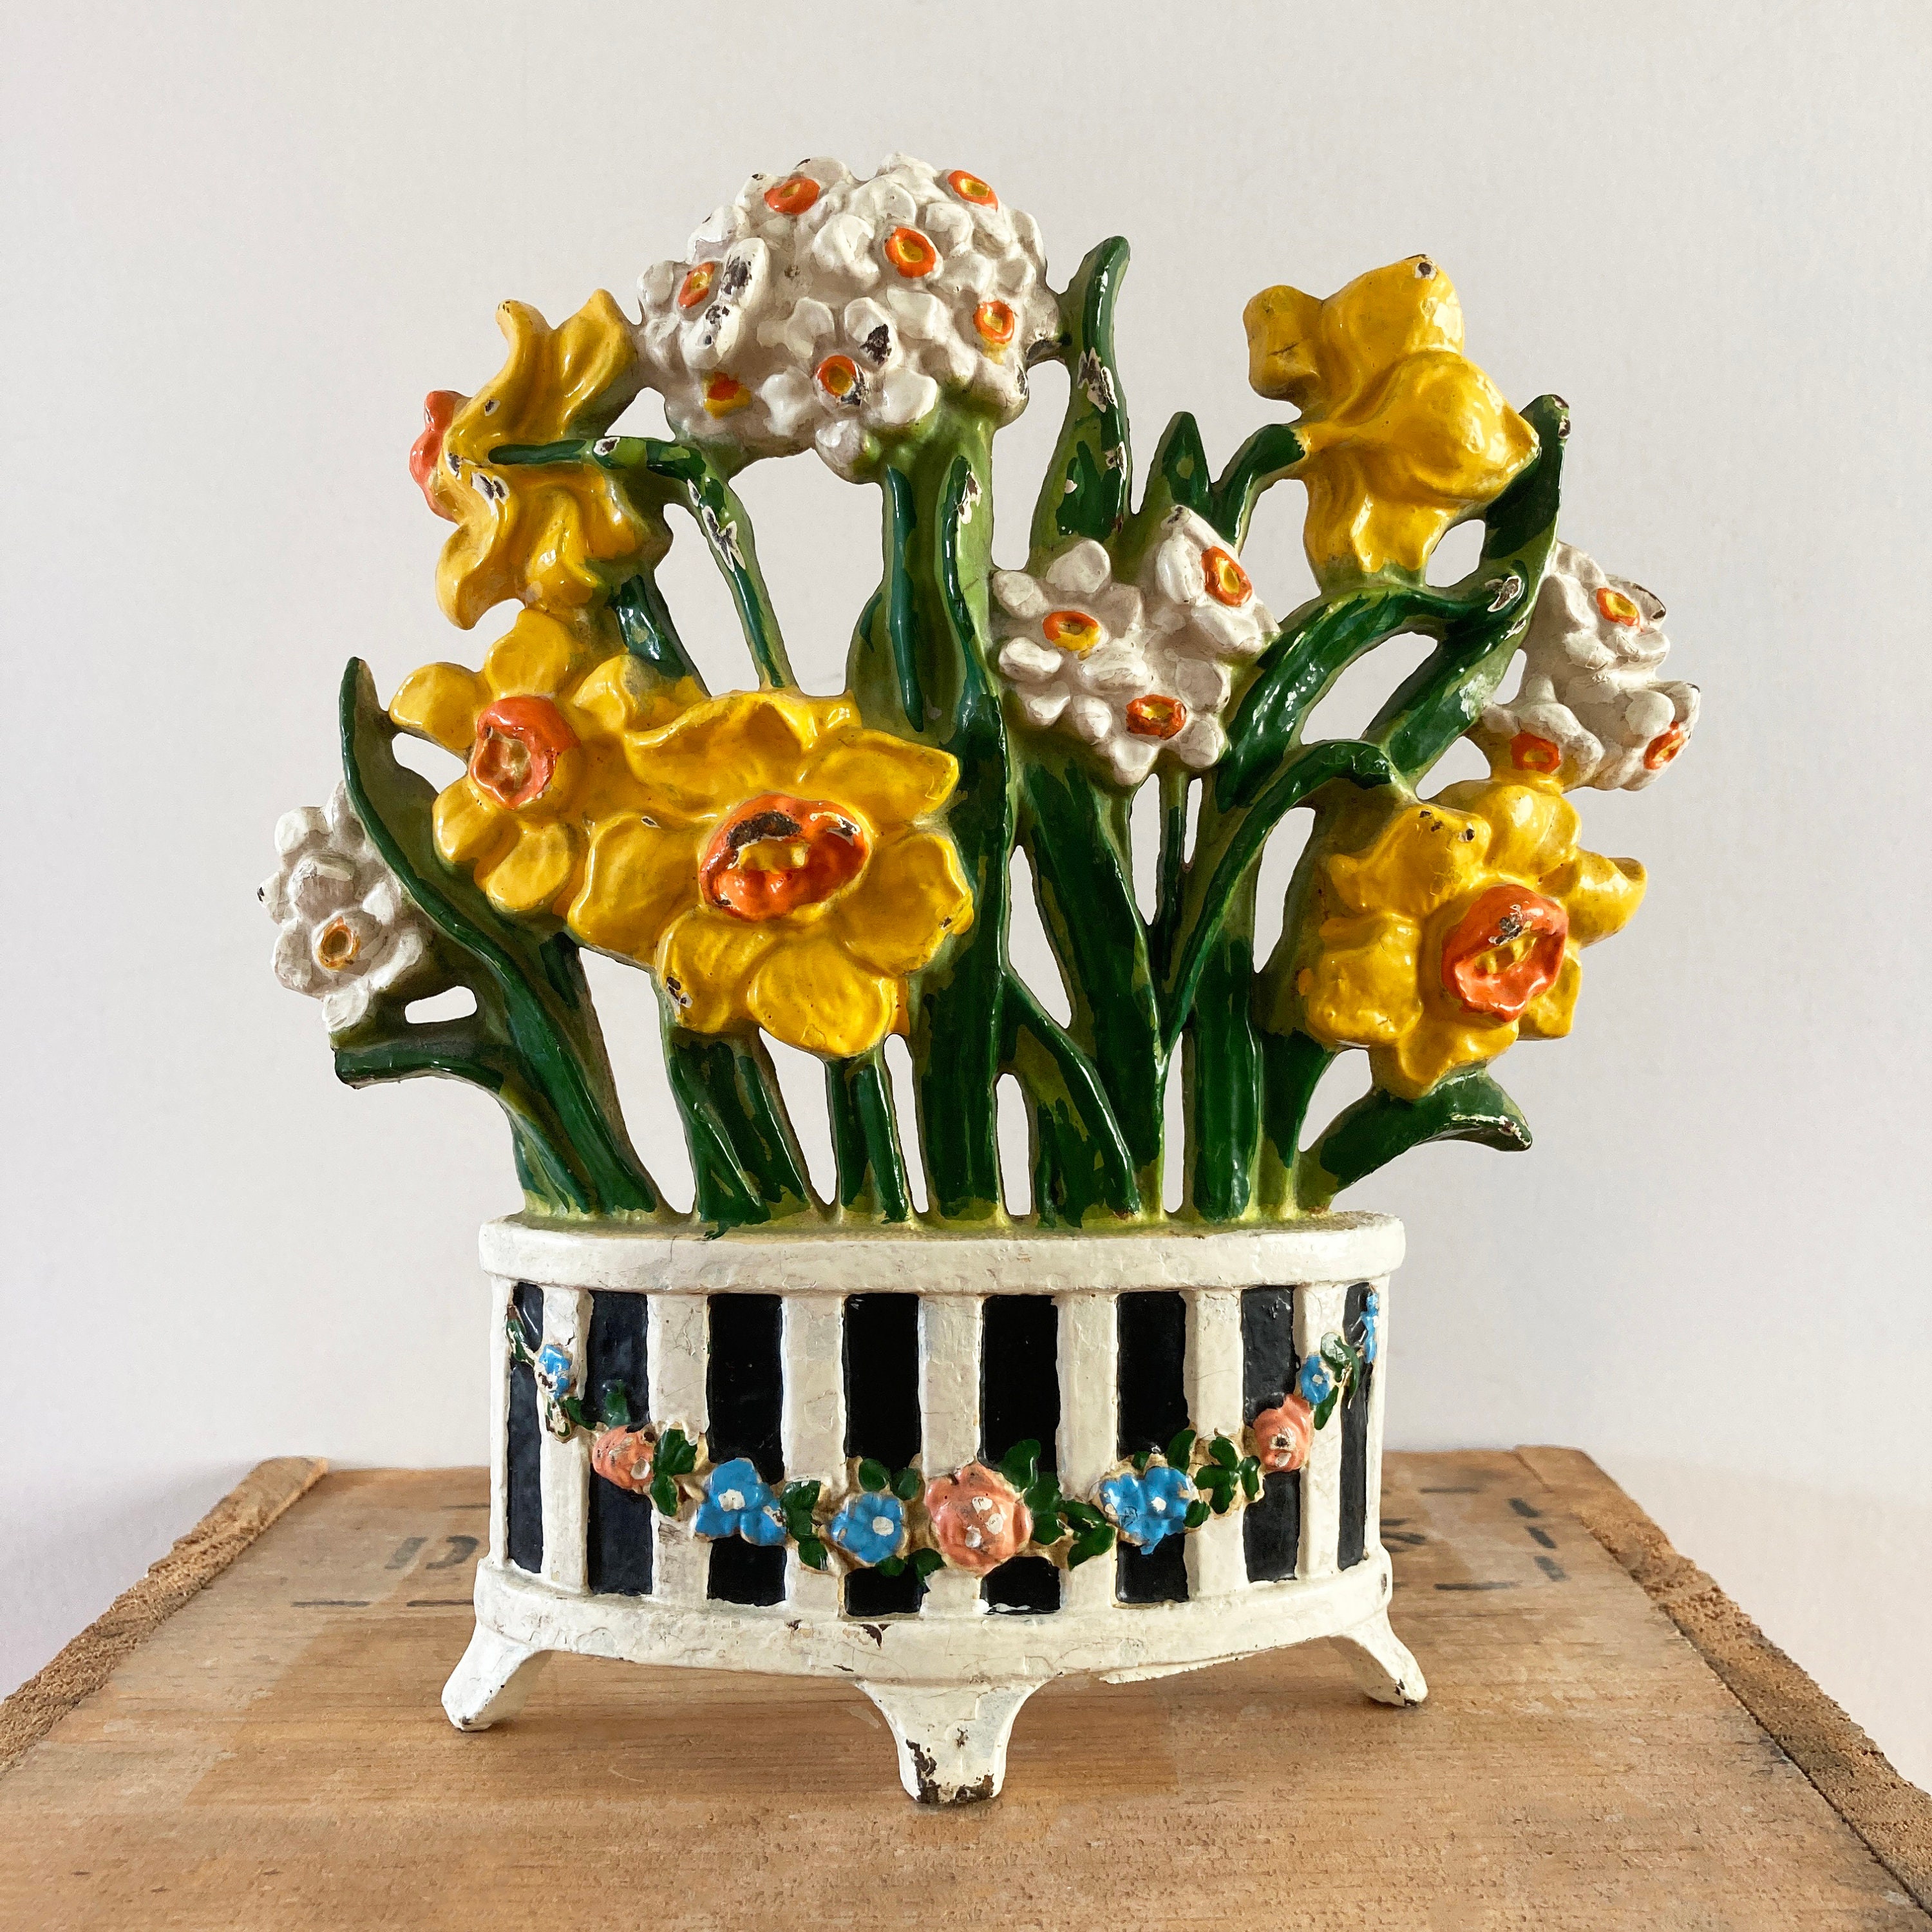 Vintage Hubley Daffodil Doorstop C1930, Excellent Condition, Painted Cast  Iron Flowers in Basket, Americana, Rustic Country or Cottage Decor 